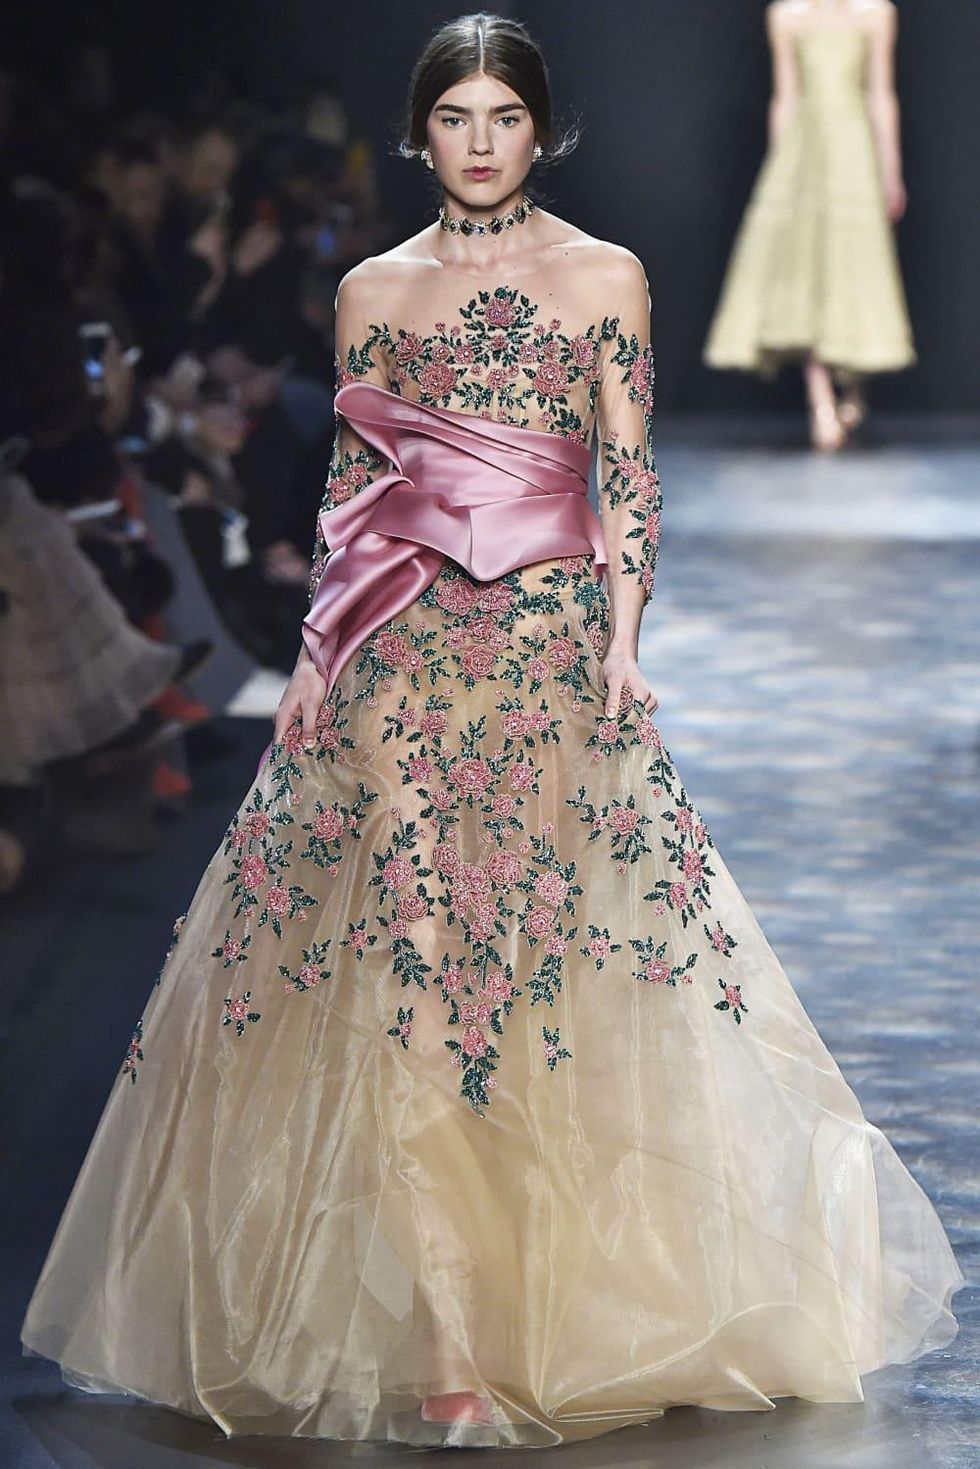 Magnificent Marchesa collection features evening gowns fit for a queen ...